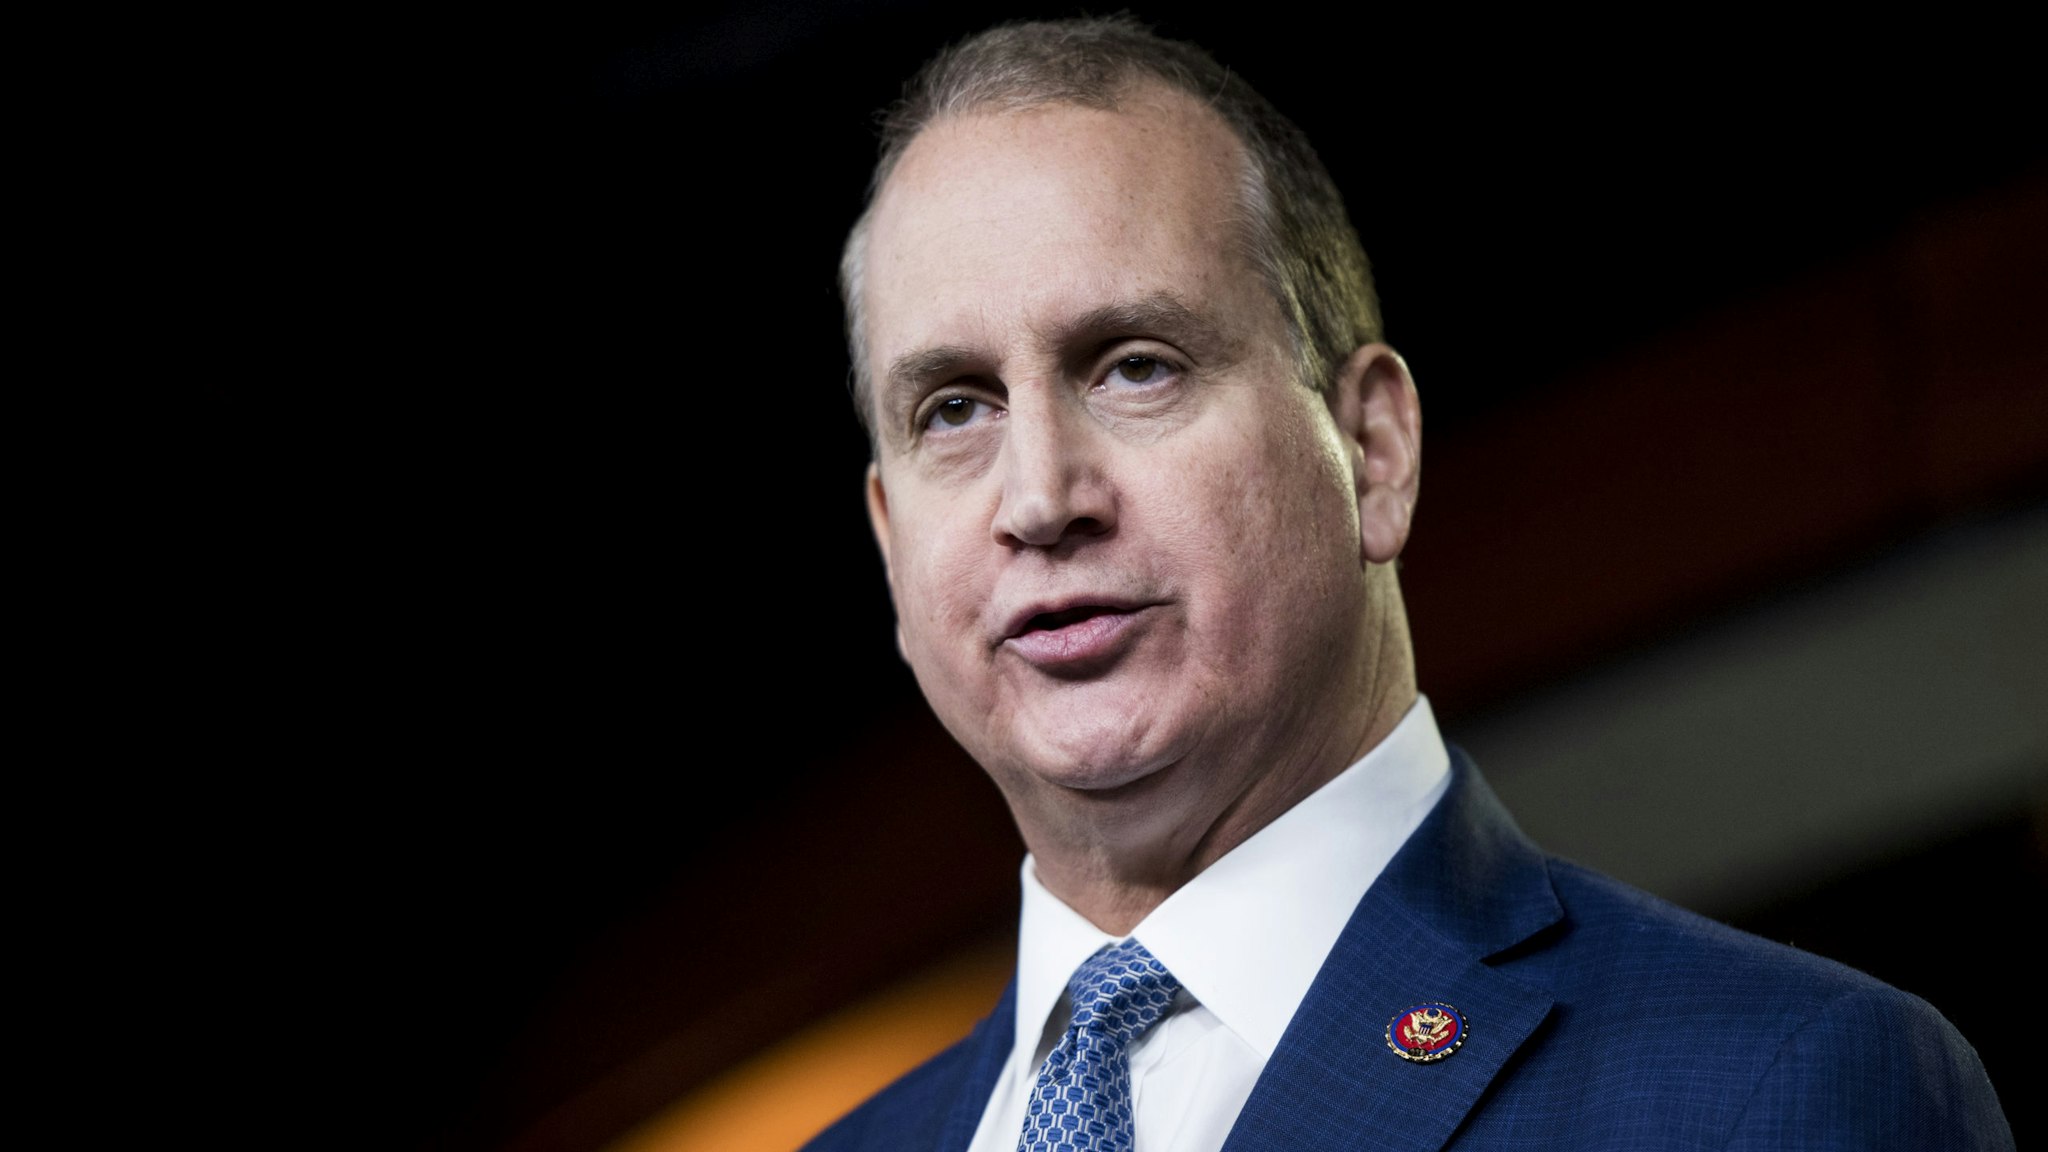 UNITED STATES - FEBRUARY 26: Rep. Mario Diaz-Balart, R-Fla., speaks about Cuba during the House Republicans weekly news conference on Wednesday, Feb. 26, 2020, in reaction to Bernie Sanders recent comments about Cuba.